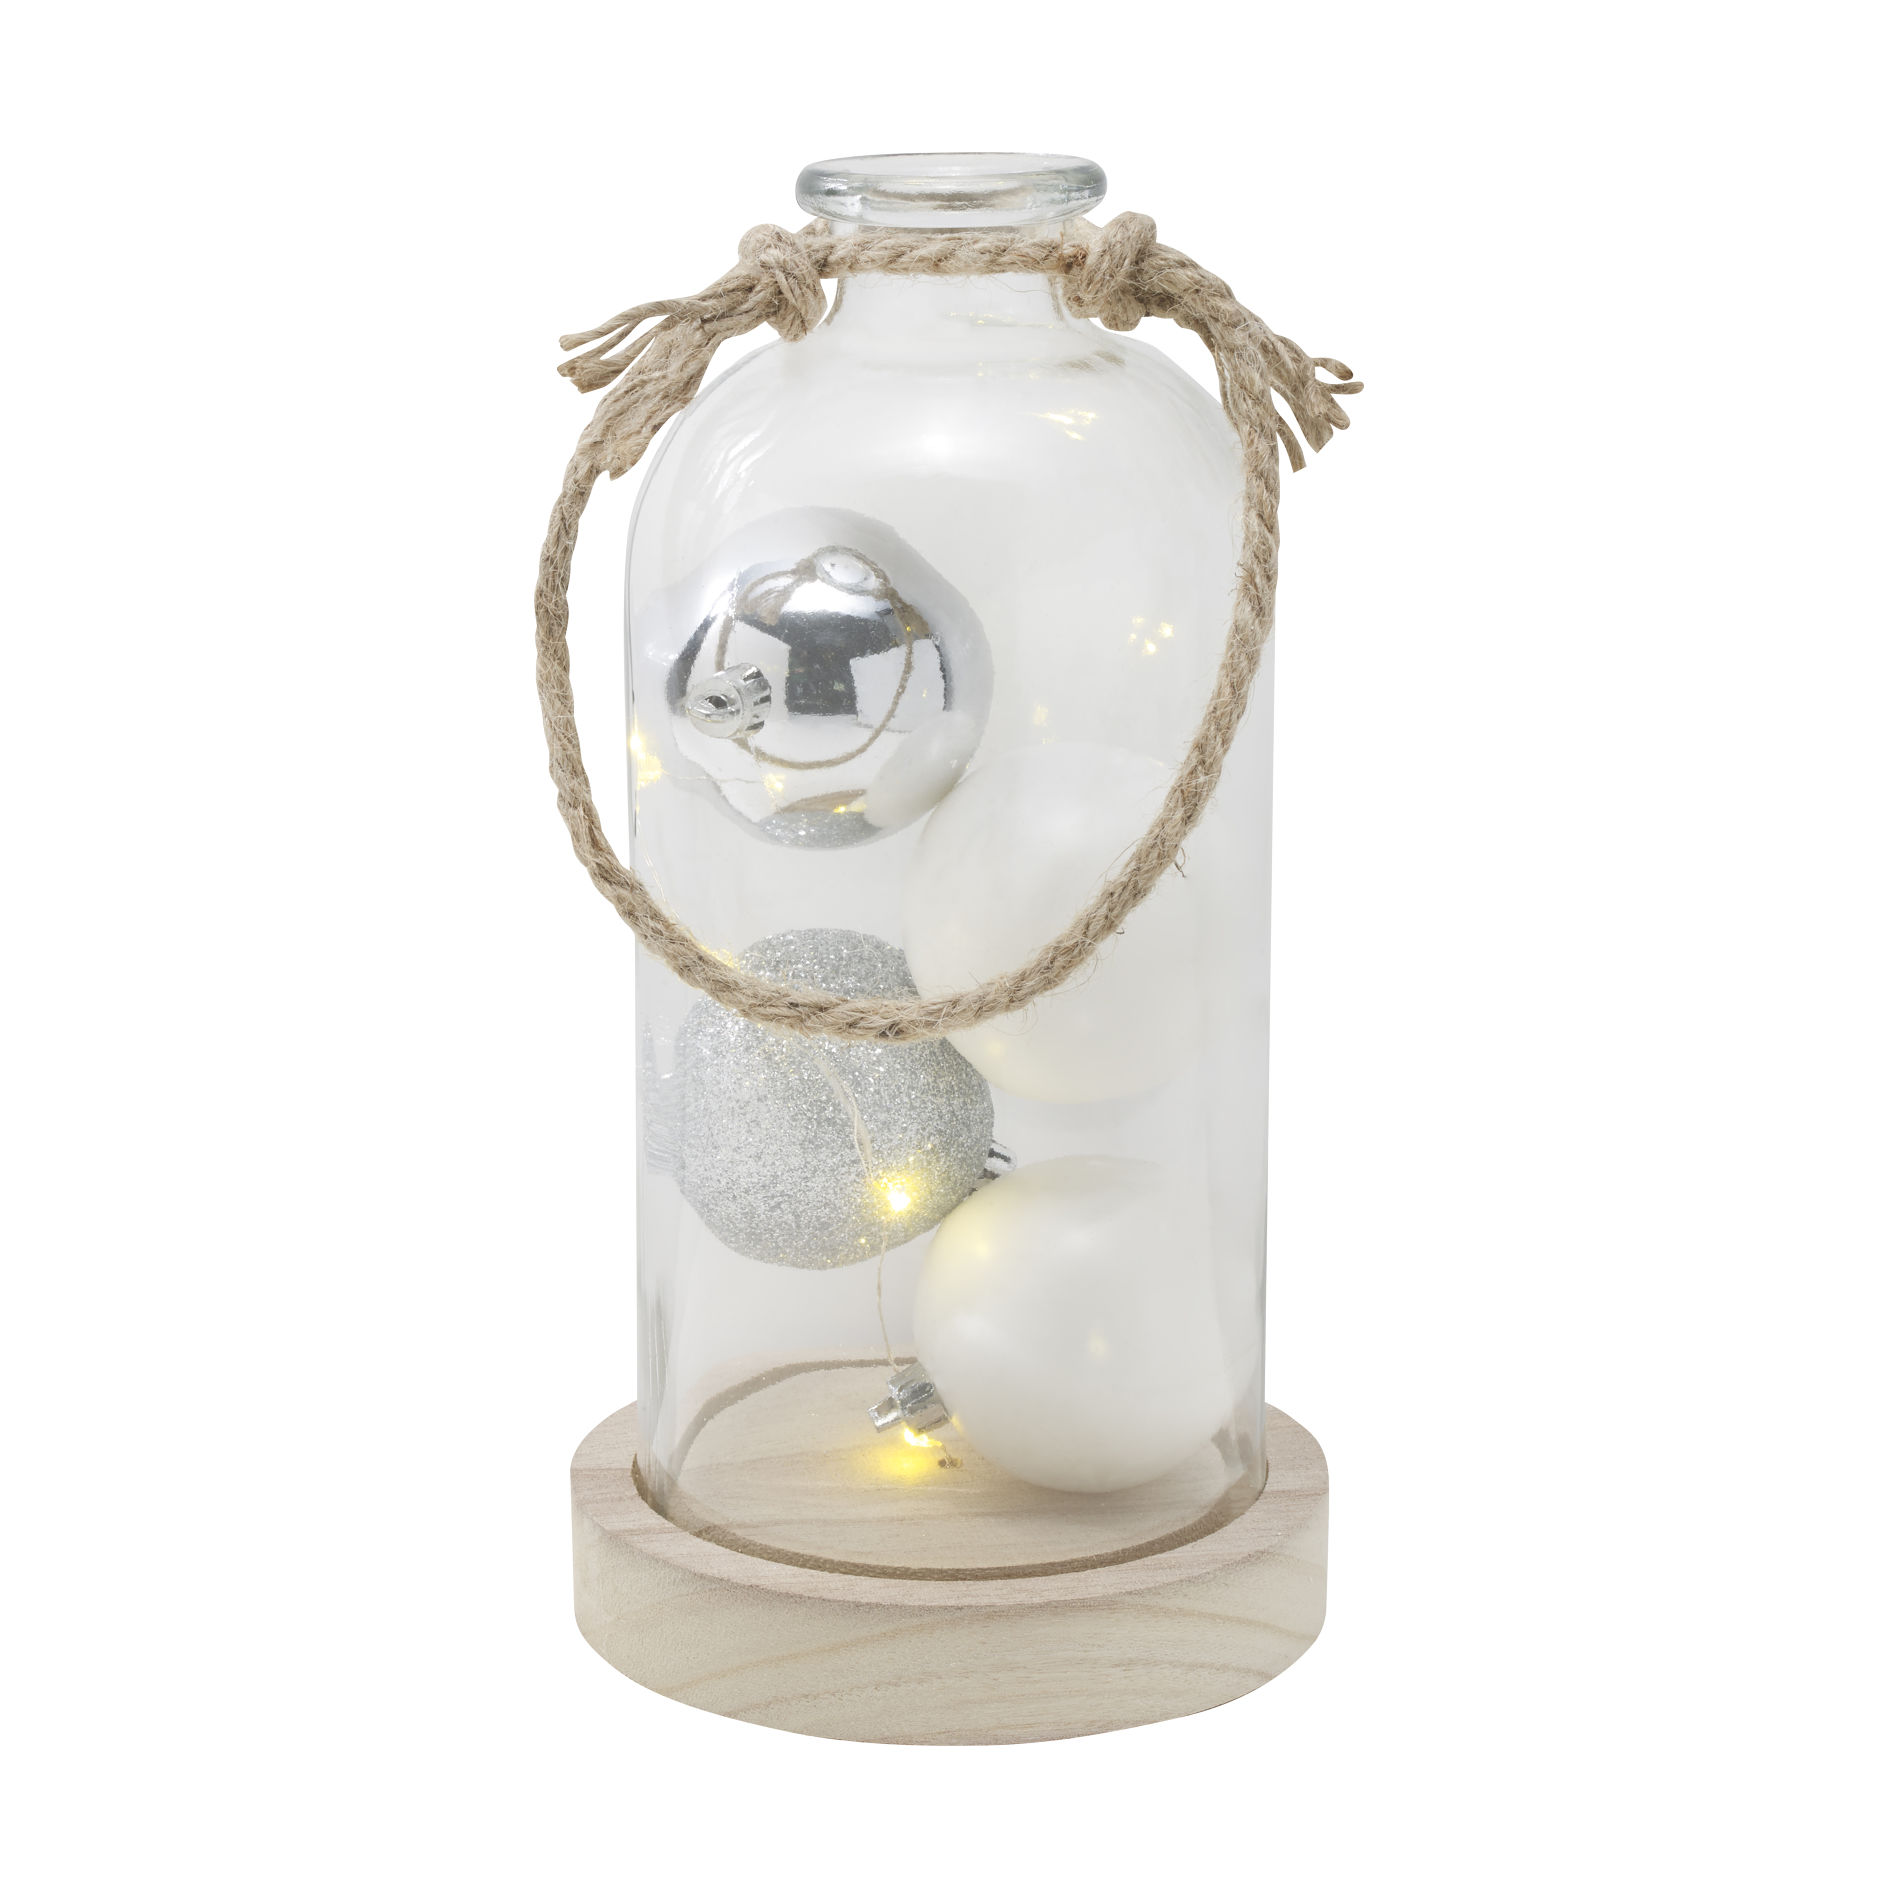 Elements LED Glass Bottle with White Ornaments, 10-Inch